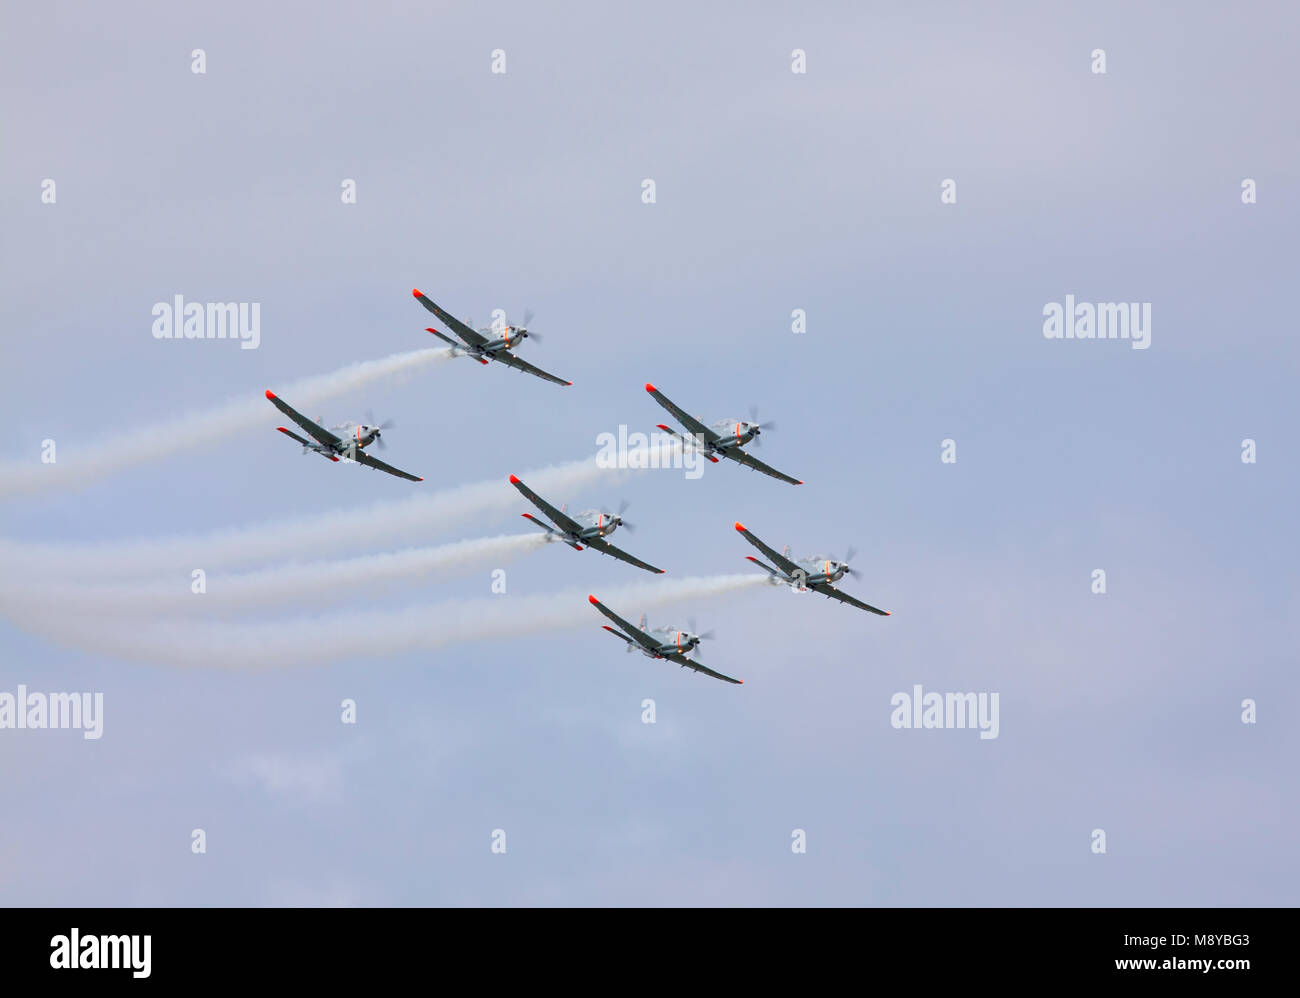 The Polish Air Force Orlik Aerobatics Team flying over sky during International Air Show at the 90th Jubilee of The Polish Air Force Academy. Stock Photo